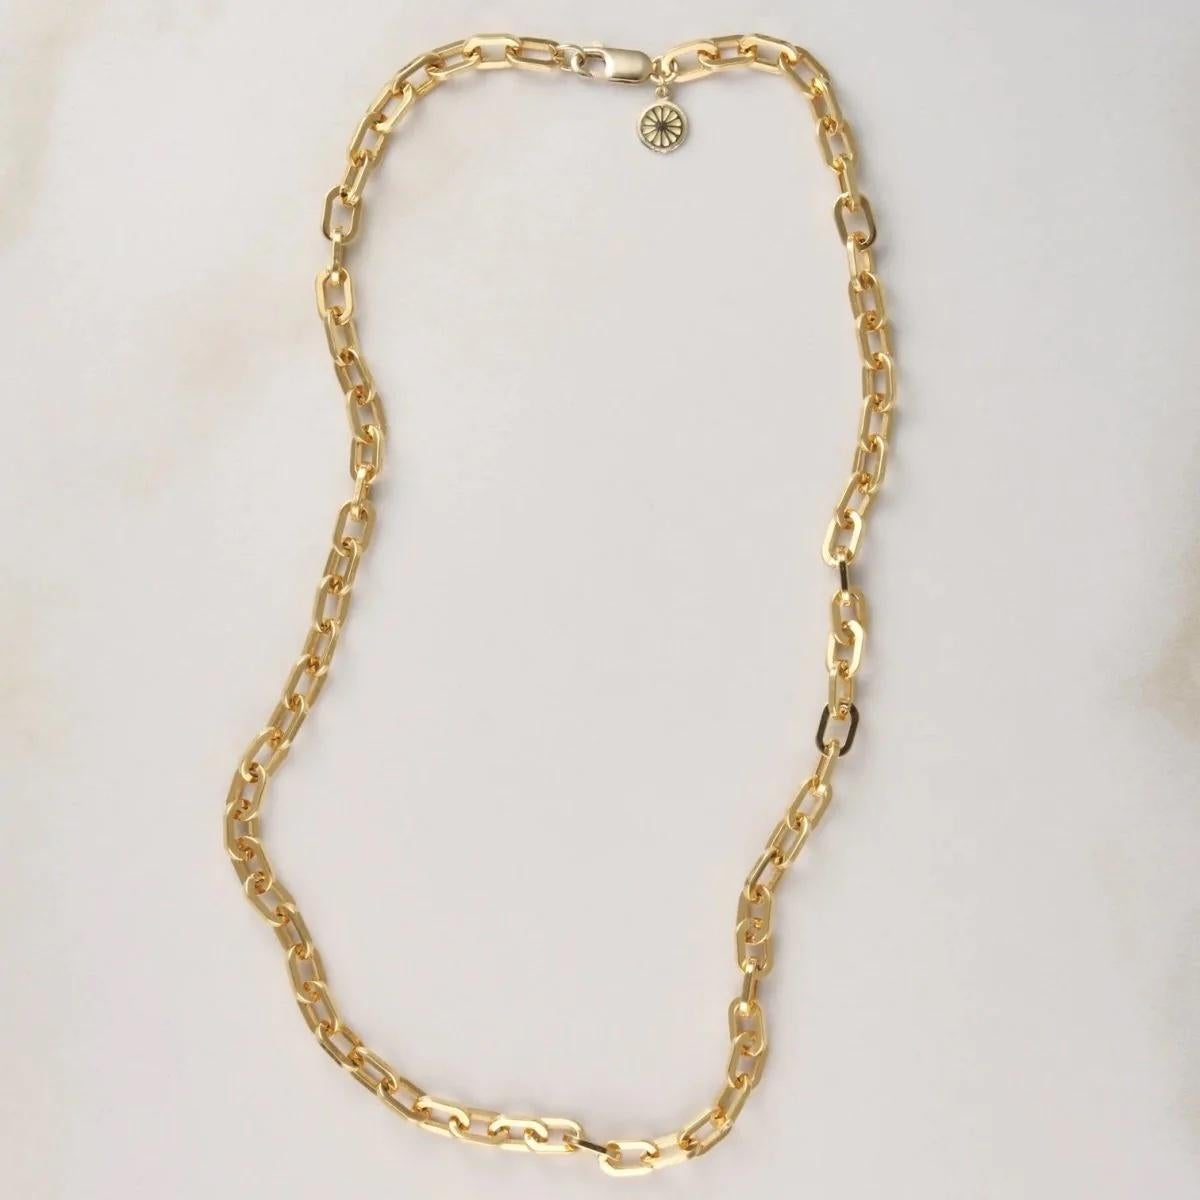 EMBLM Chain Link Necklace – 14k Yellow Gold In New Condition For Sale In Los Angeles, CA